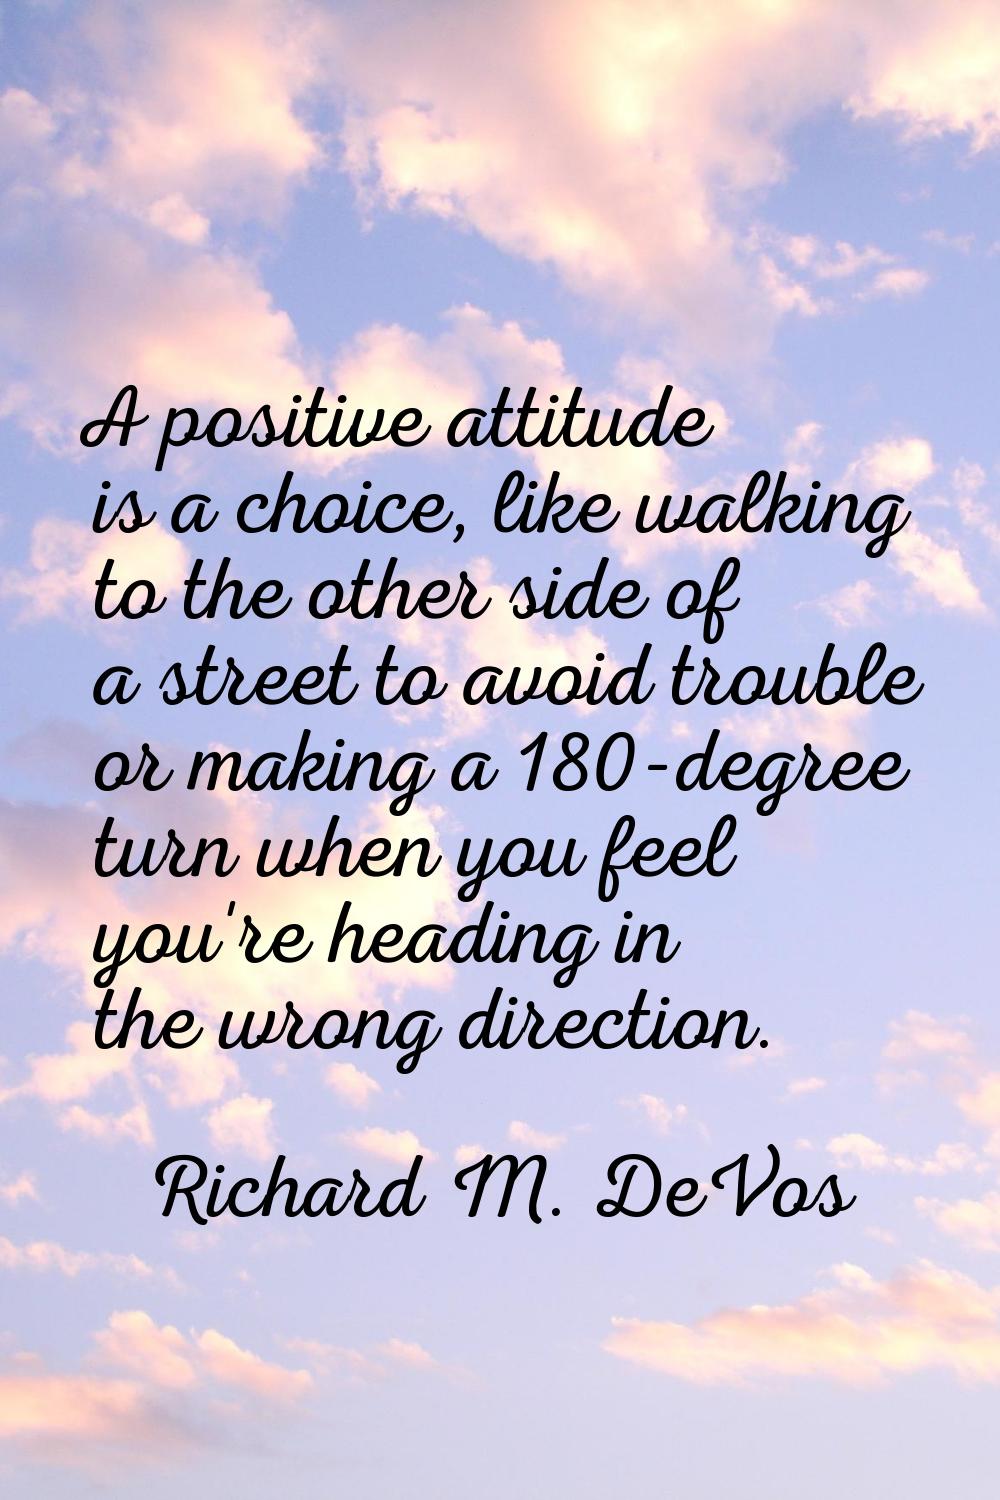 A positive attitude is a choice, like walking to the other side of a street to avoid trouble or mak